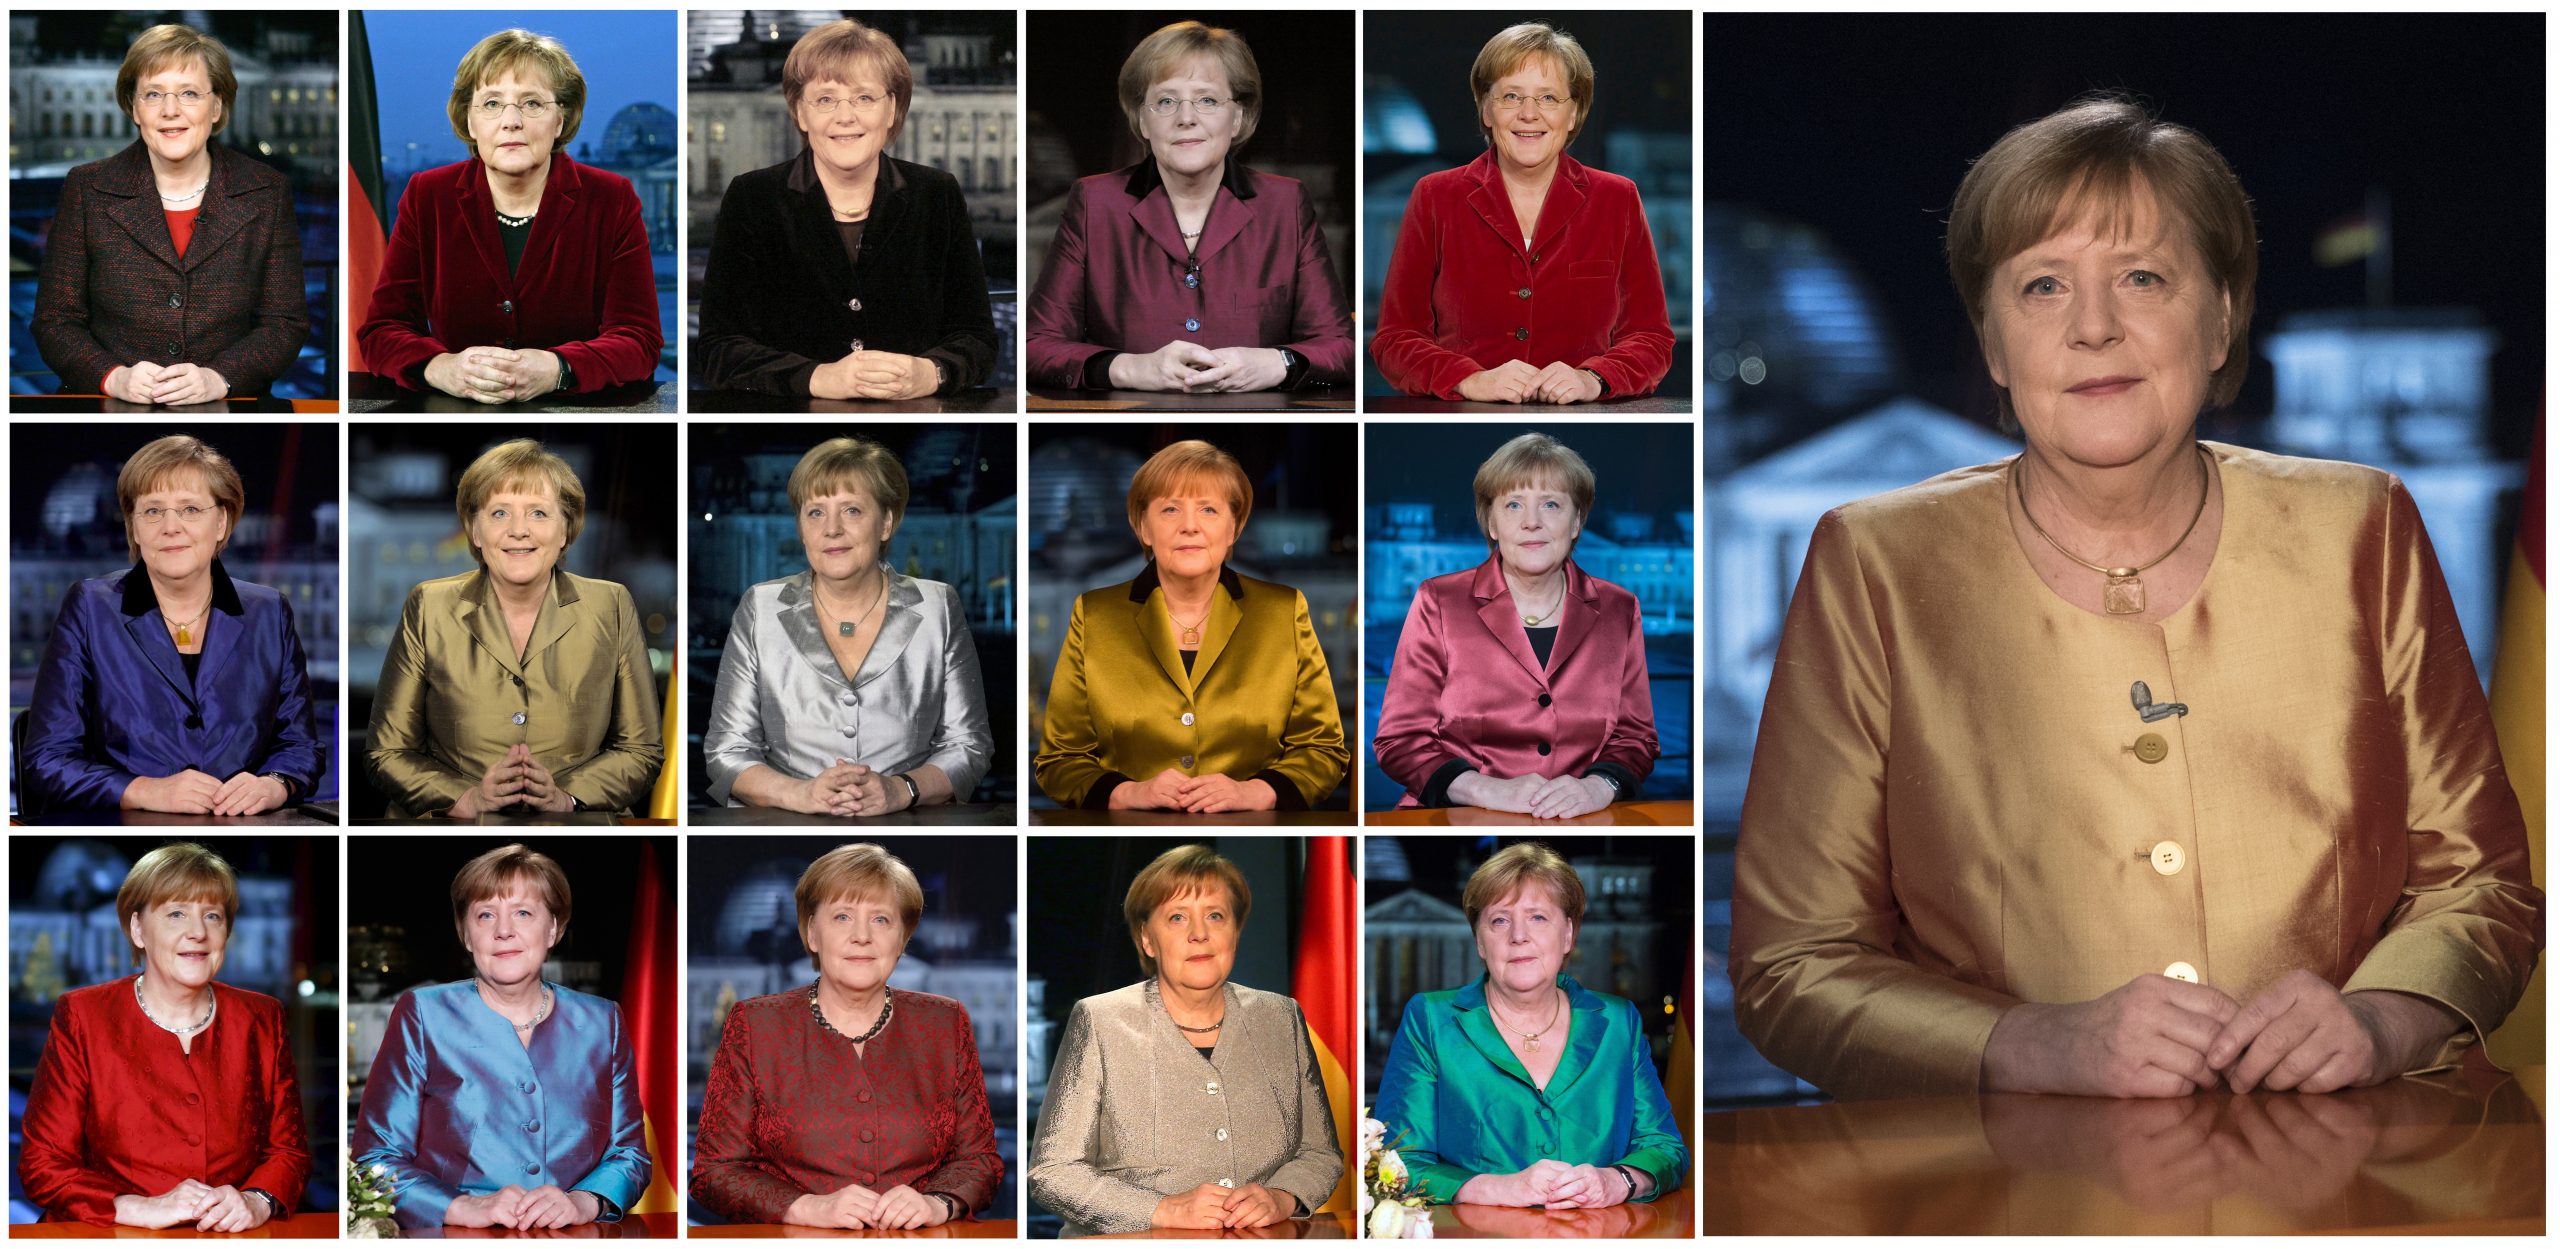 epa08911977 A composite image compiling 15 file photos of German Chancellor Angela Merkel during the respective recordings of her New Year's speeches in the last 15 years from 2005 to 2009 (upper row L-R), from 2010 to 2014 (center row L-R) and from 2015 to 2019 (bottom row L-R) and the most recent one (R) of her last New Year's address as German Chancellor at the Chancellery in Berlin, Germany, 30 December 2020.  EPA/VARIOUS *** Local Caption *** 51719278